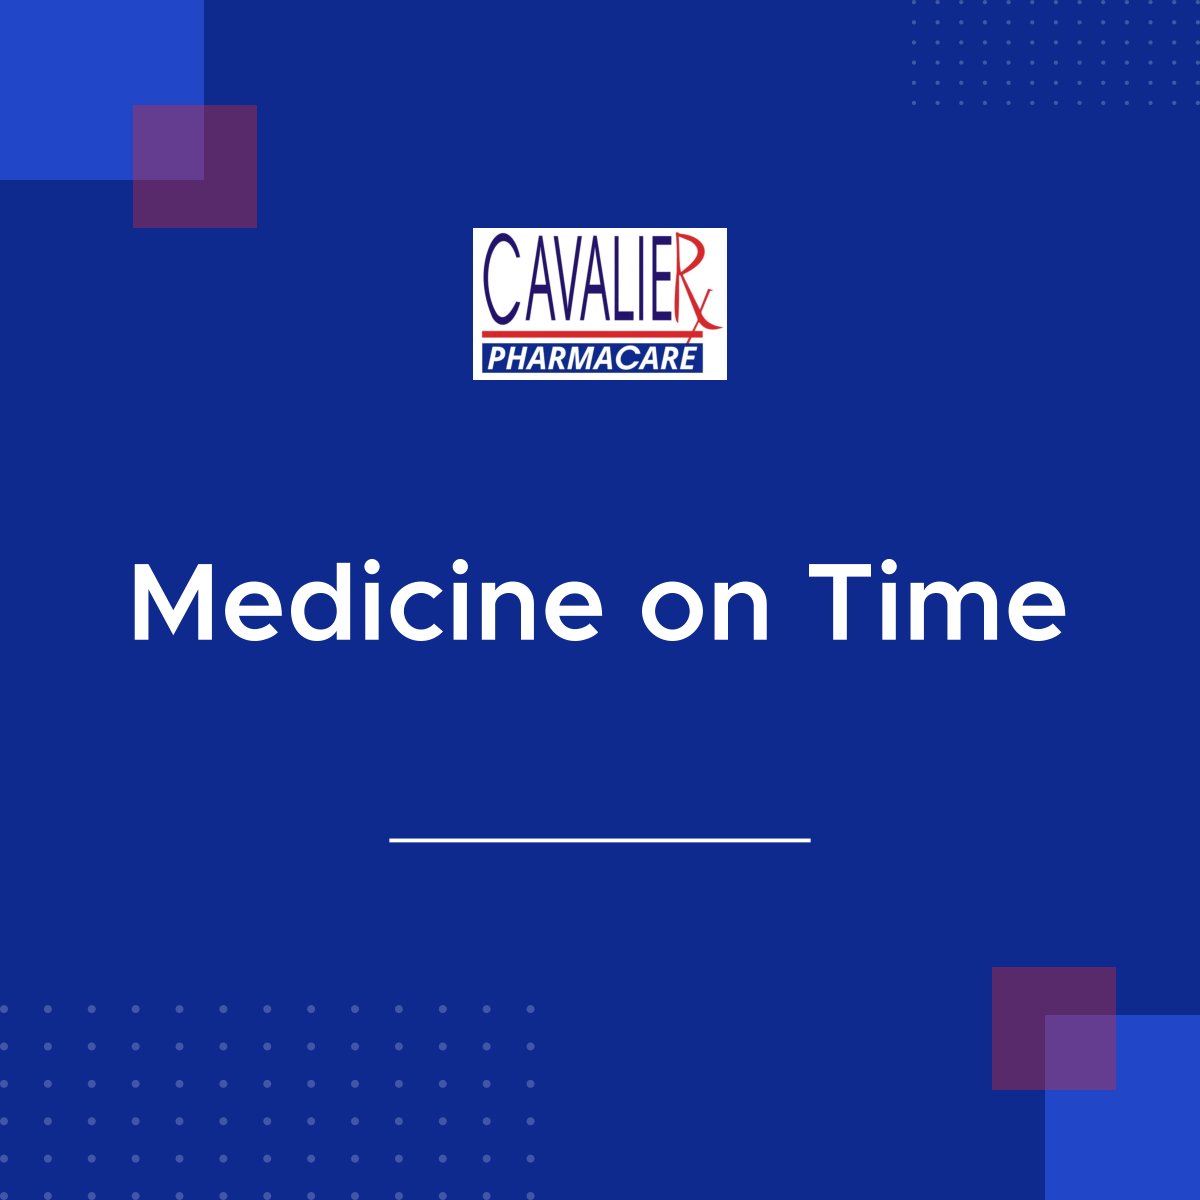 Our Medicine On Time (MOT) packaging ensures convenient medication compliance. Your medicine is packaged as to its dosage and schedule to make it easier to remember and take on time.

#MartinsvilleVA #PharmacyServices #MedicineOnTime